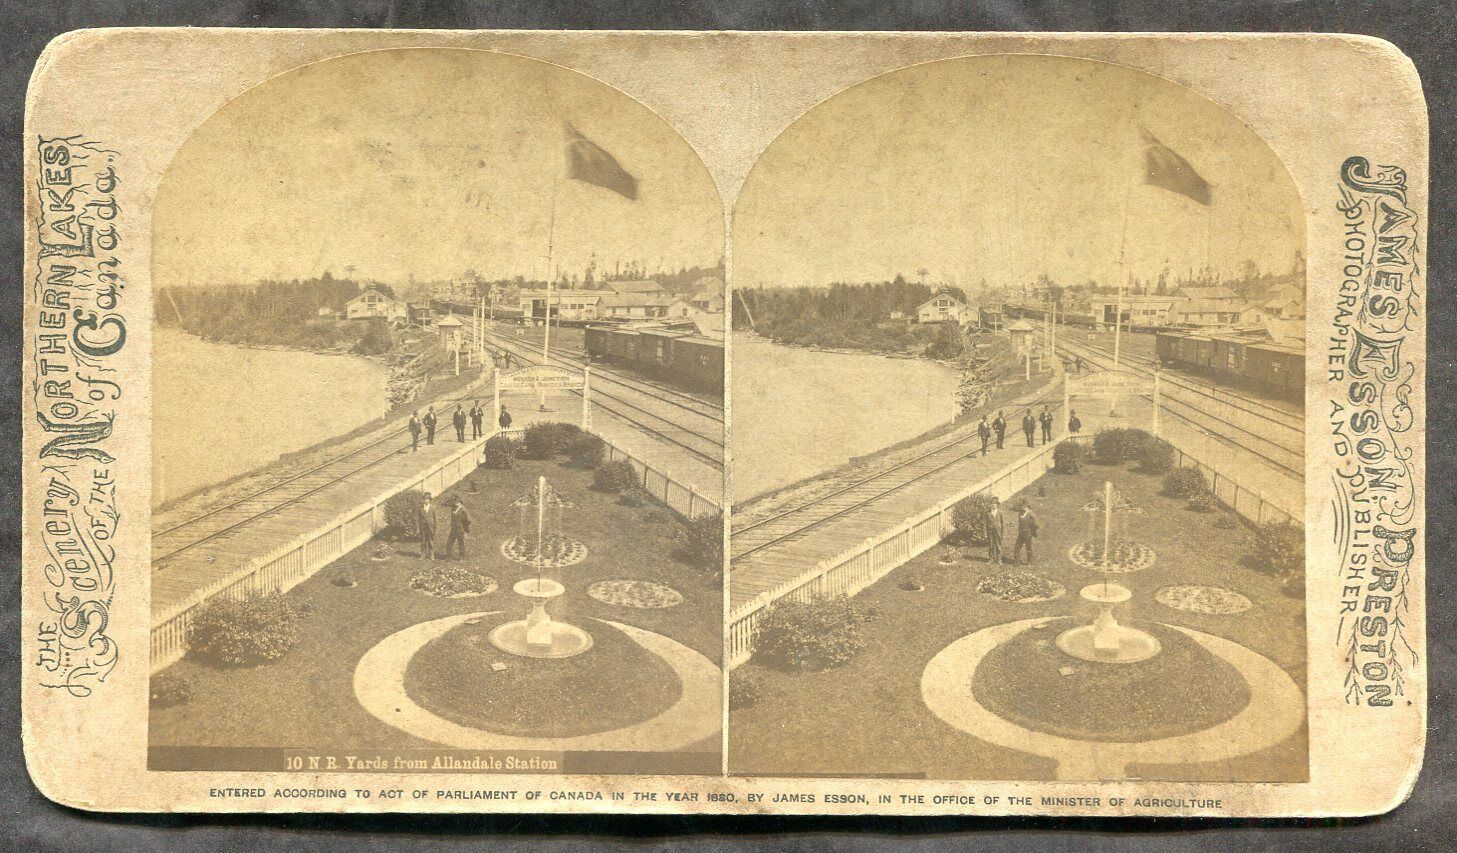 Canada 1880s Stereoview Photo by Esson. ALLANDALE Train Station Muskoka Junction